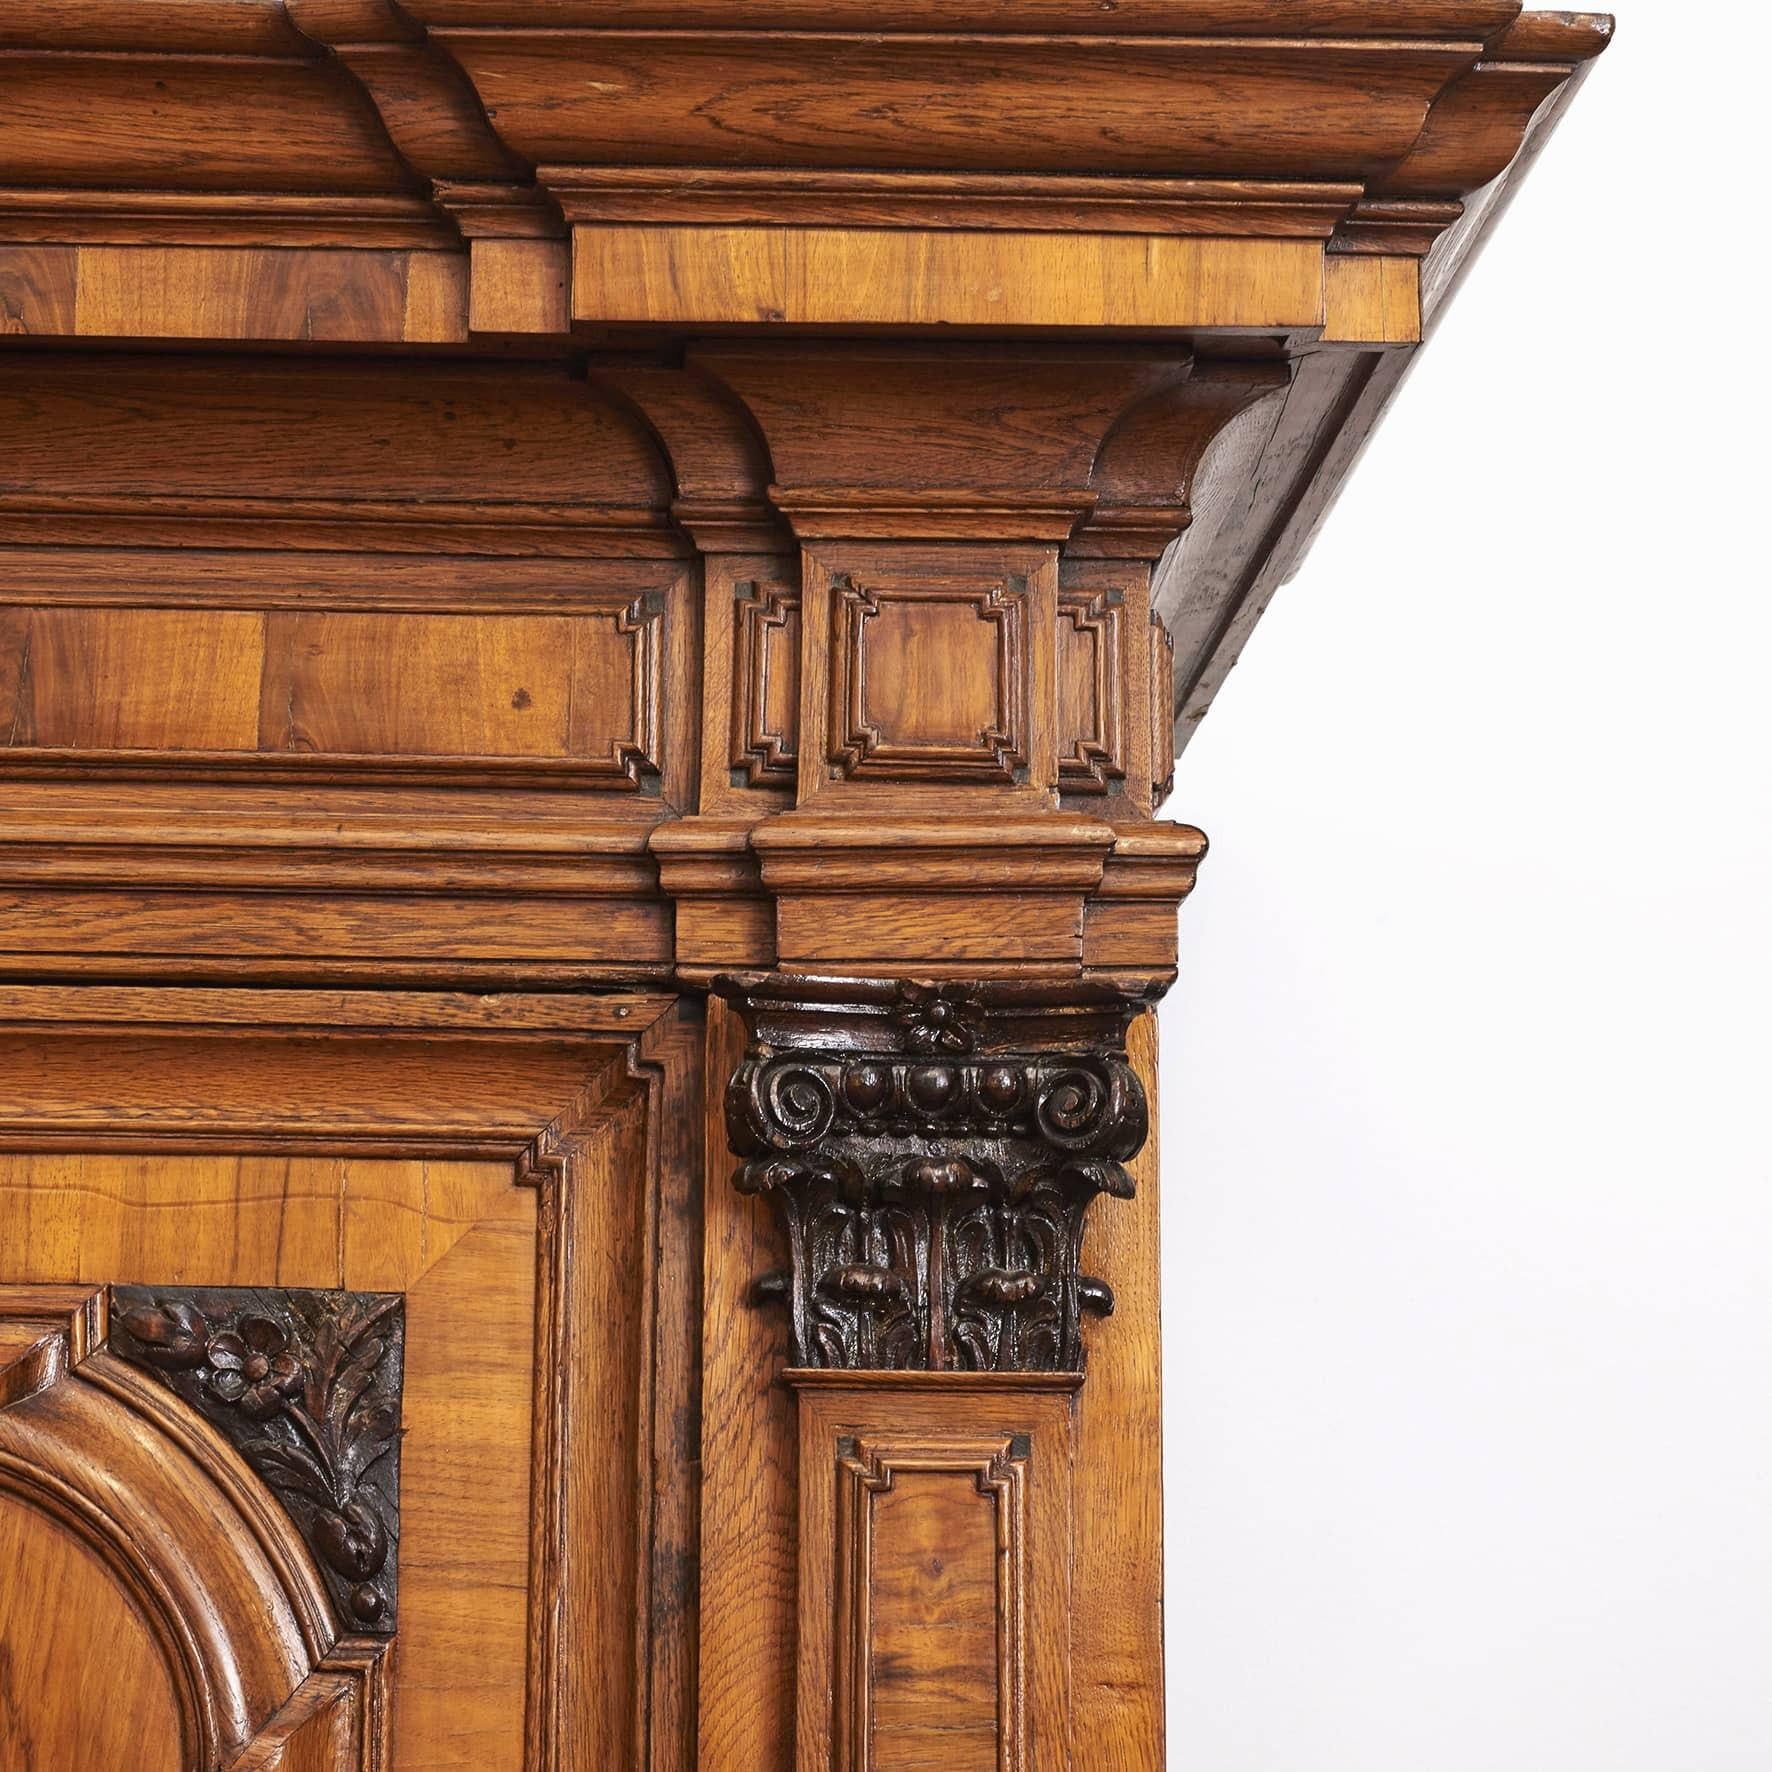 Danish 18th Ctr. Baroque Manor House Kast or Armoire in Walnut & Oak In Good Condition For Sale In Kastrup, DK